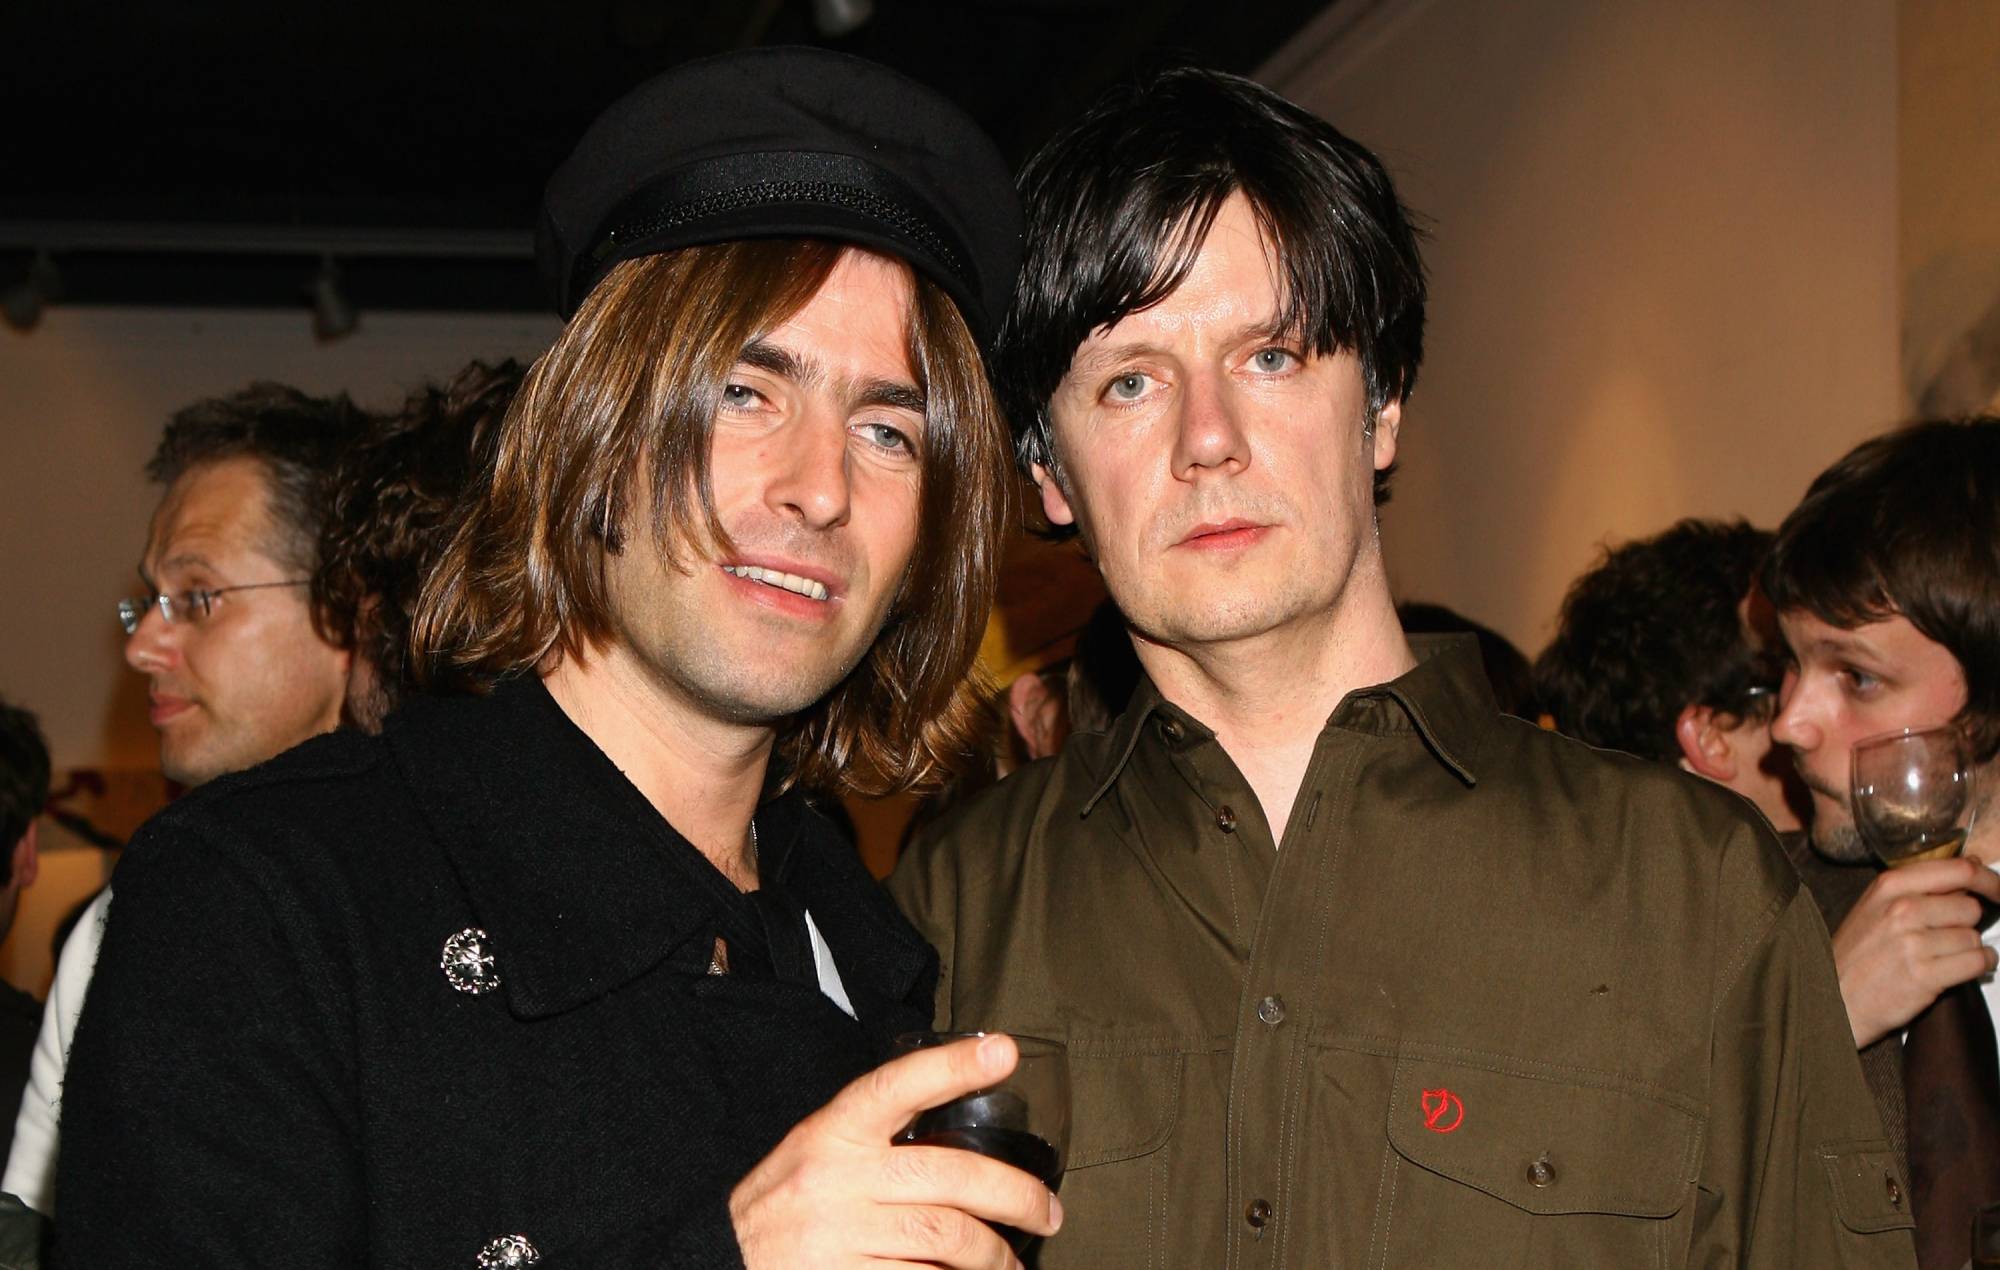 Former member of the Stone Roses turned artist, John Squire, and Liam Gallagher pose for a photograph at the New Work Exhibition at Smithfield Gallery on July 3, 2007 in London, England. (Photo by Chris Jackson/Getty Images)